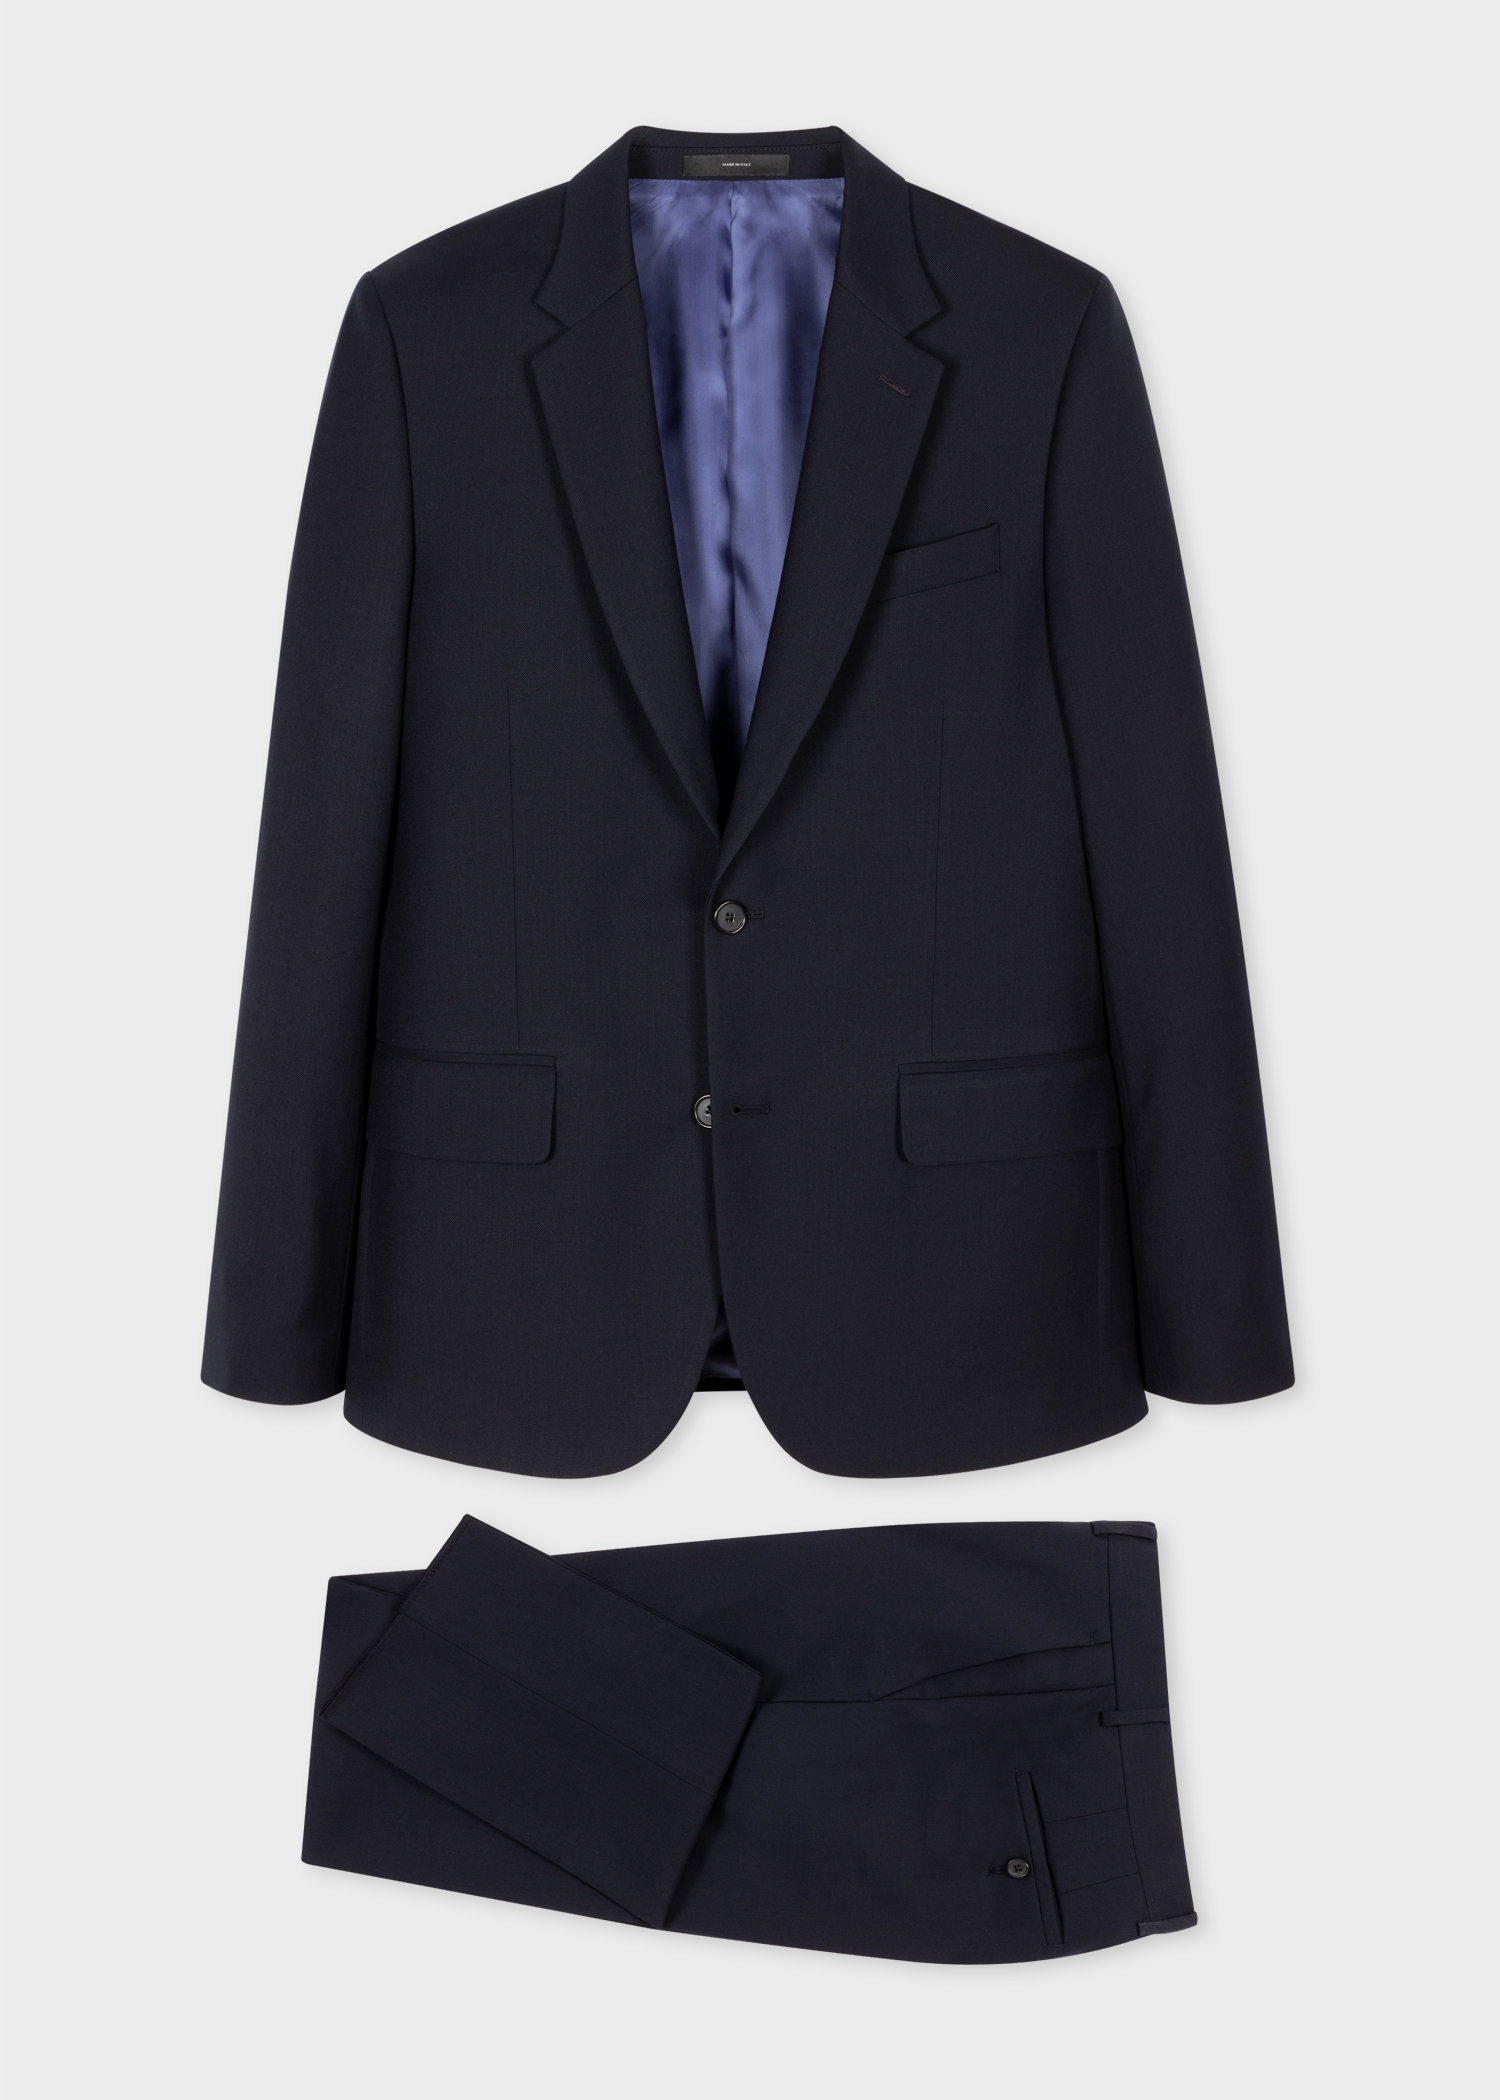 The Soho - Men's Tailored-Fit Black Wool 'A Suit To Travel In'